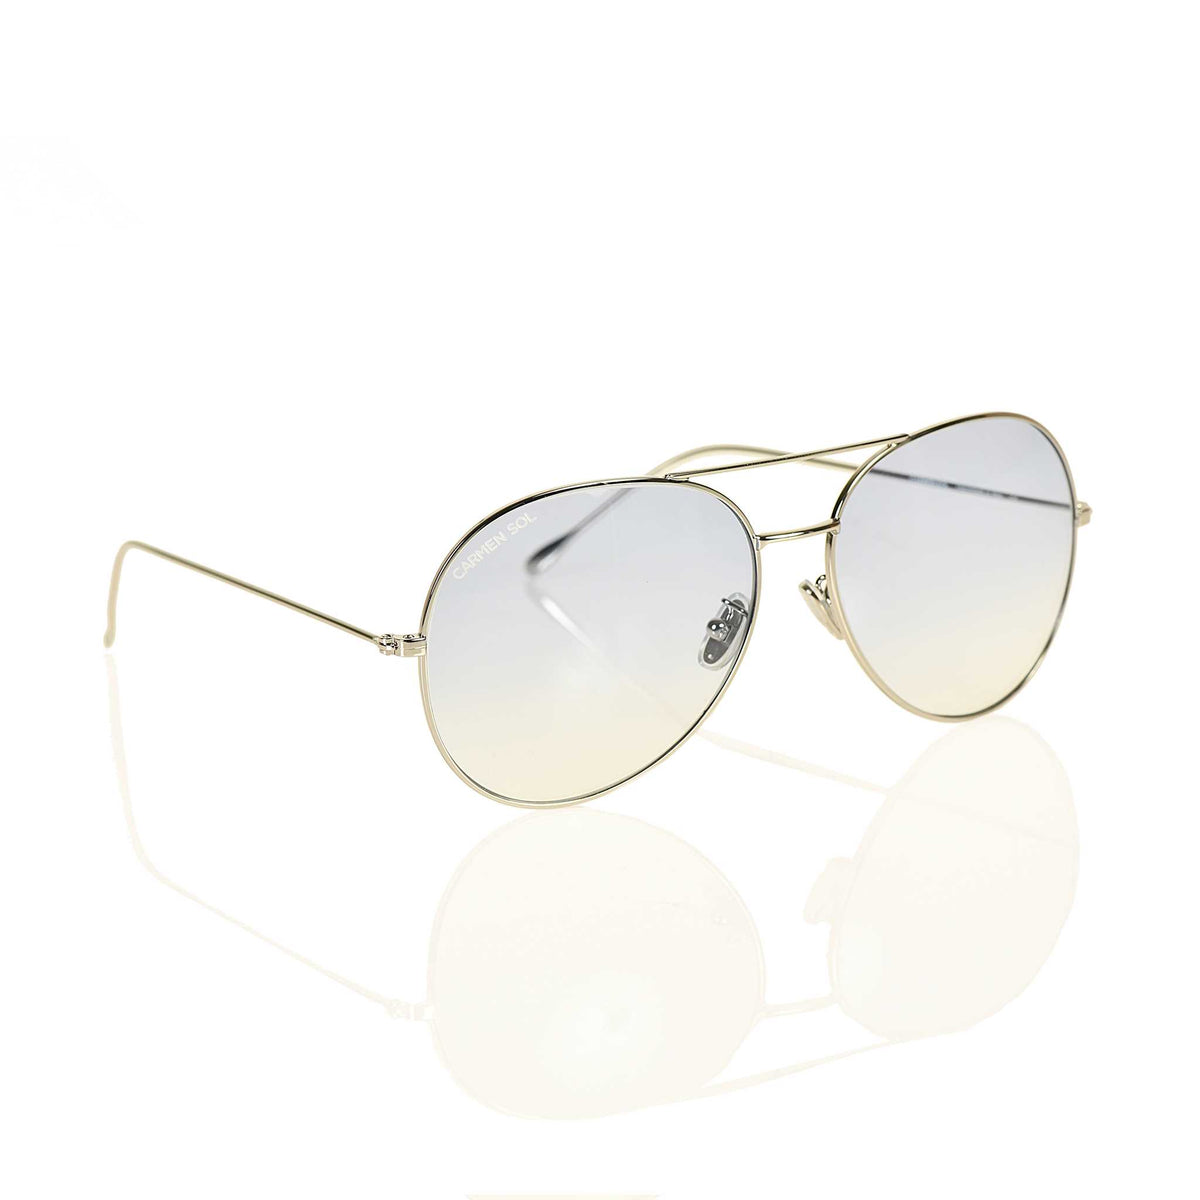 Gold sunglasses for women with tone on tone lenses